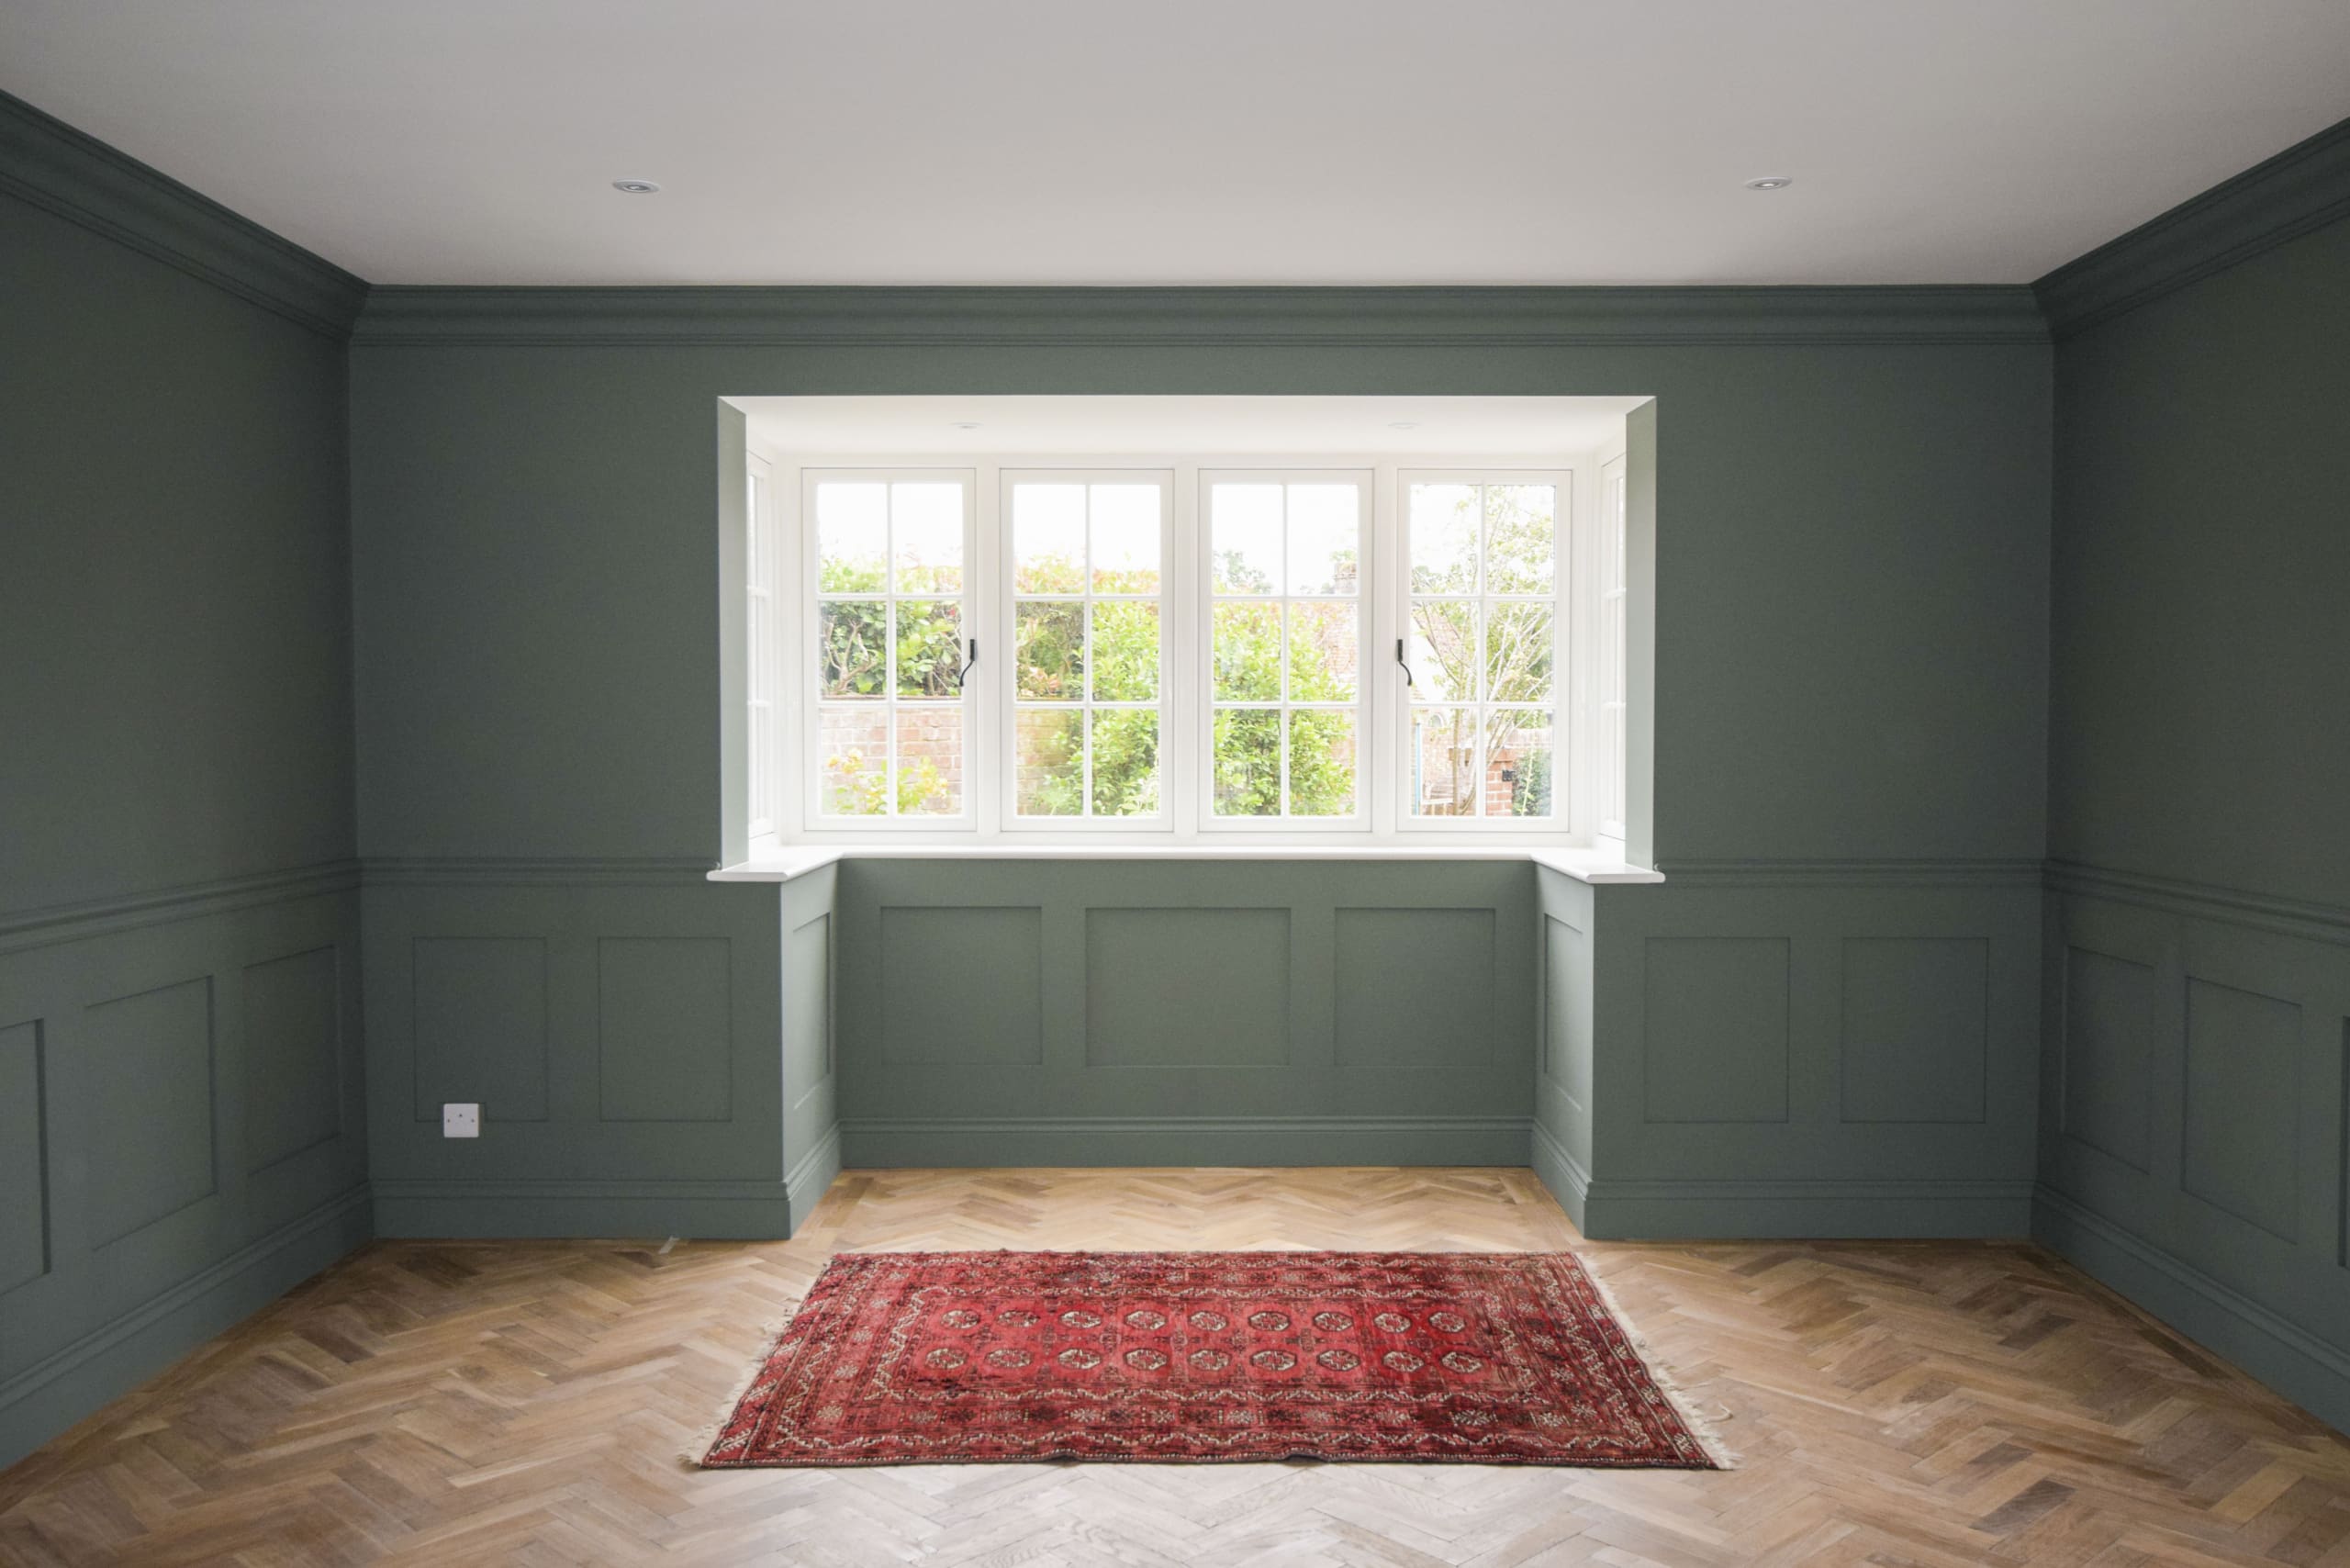 Living room with parquet flooring and aztec rug, bay window with traditional windows and dark green paintwork to the walls.